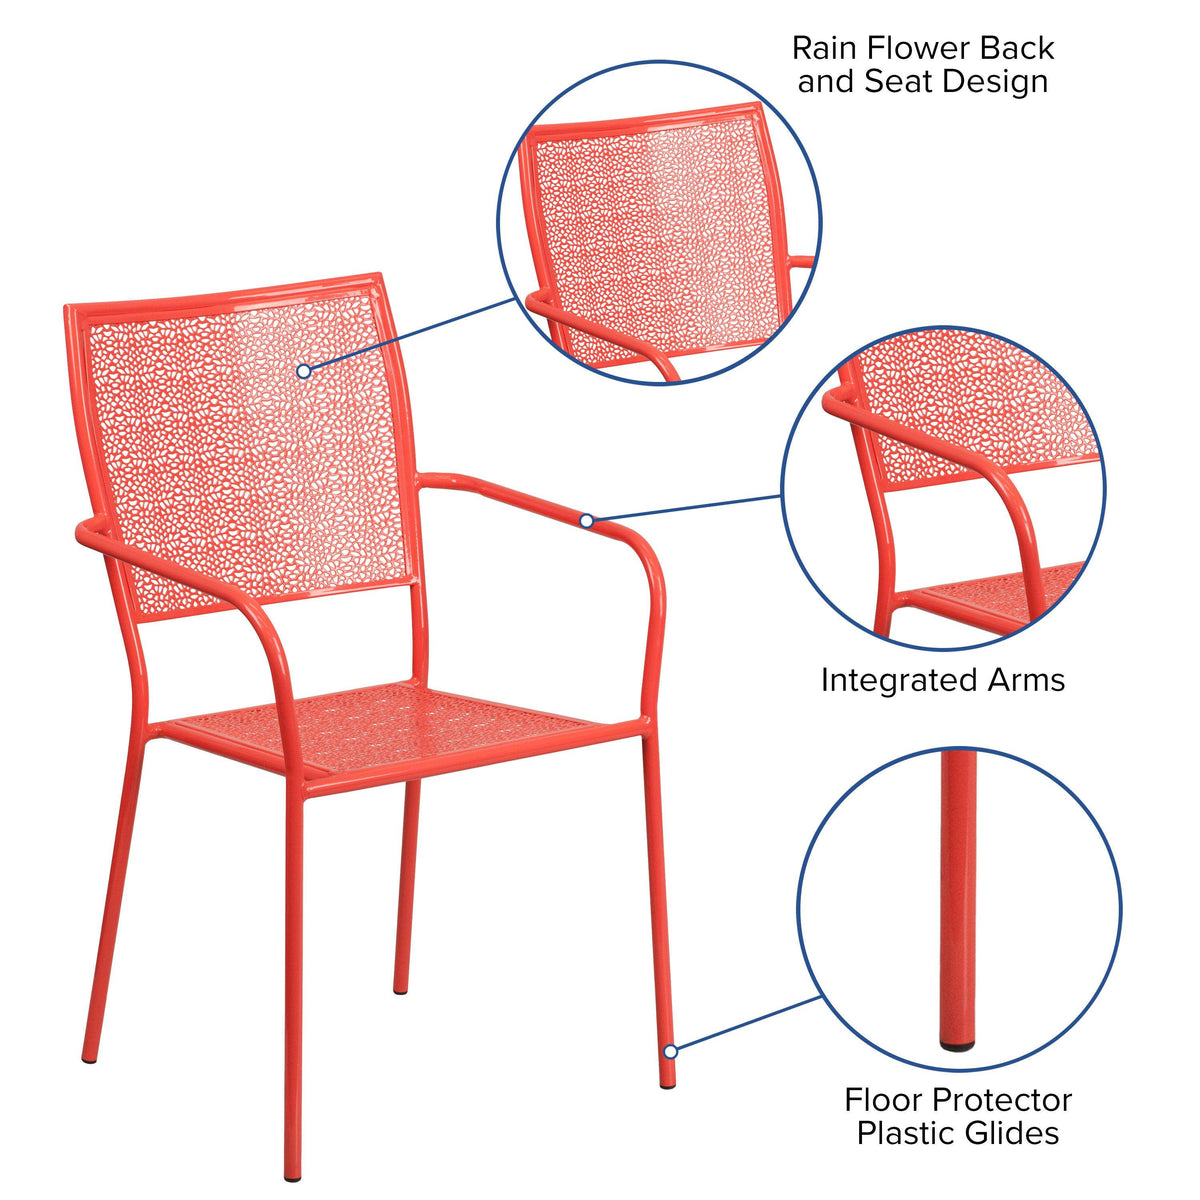 Coral |#| Coral Indoor-Outdoor Steel Patio Arm Chair with Square Back - Bistro Chair